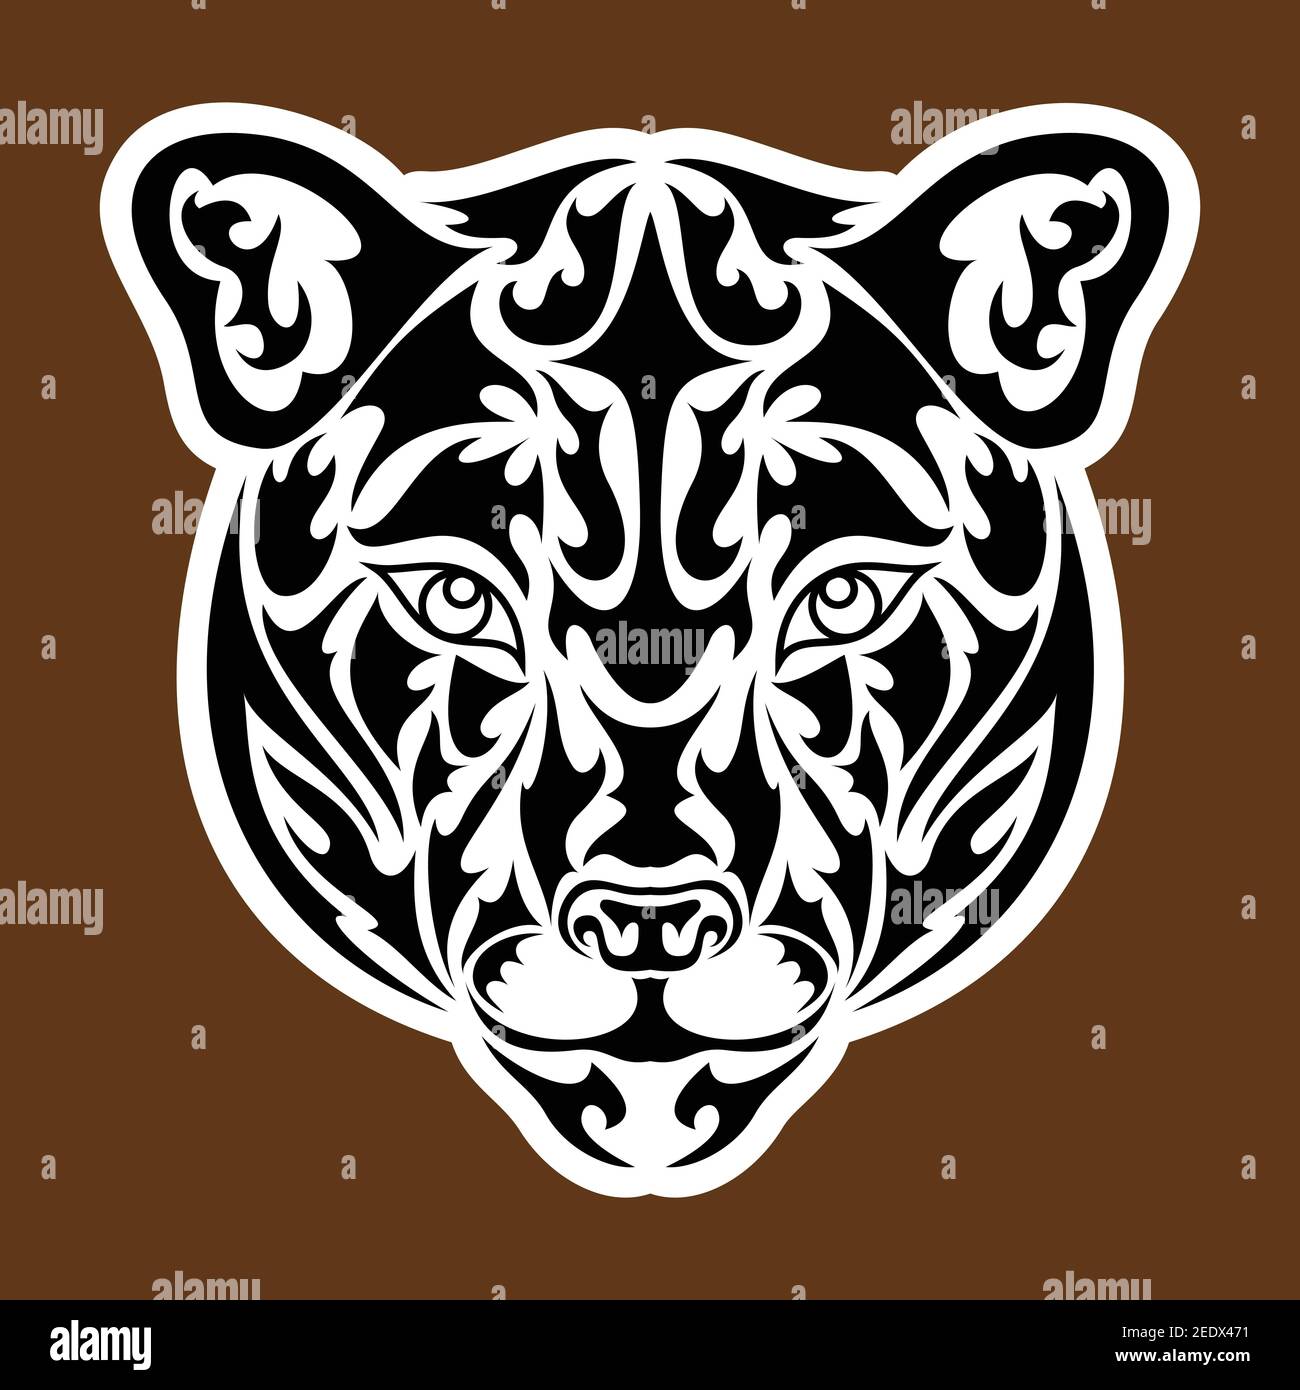 Hand drawn abstract portrait of a puma. Sticker. Vector stylized illustration isolated on brown background. Stock Vector